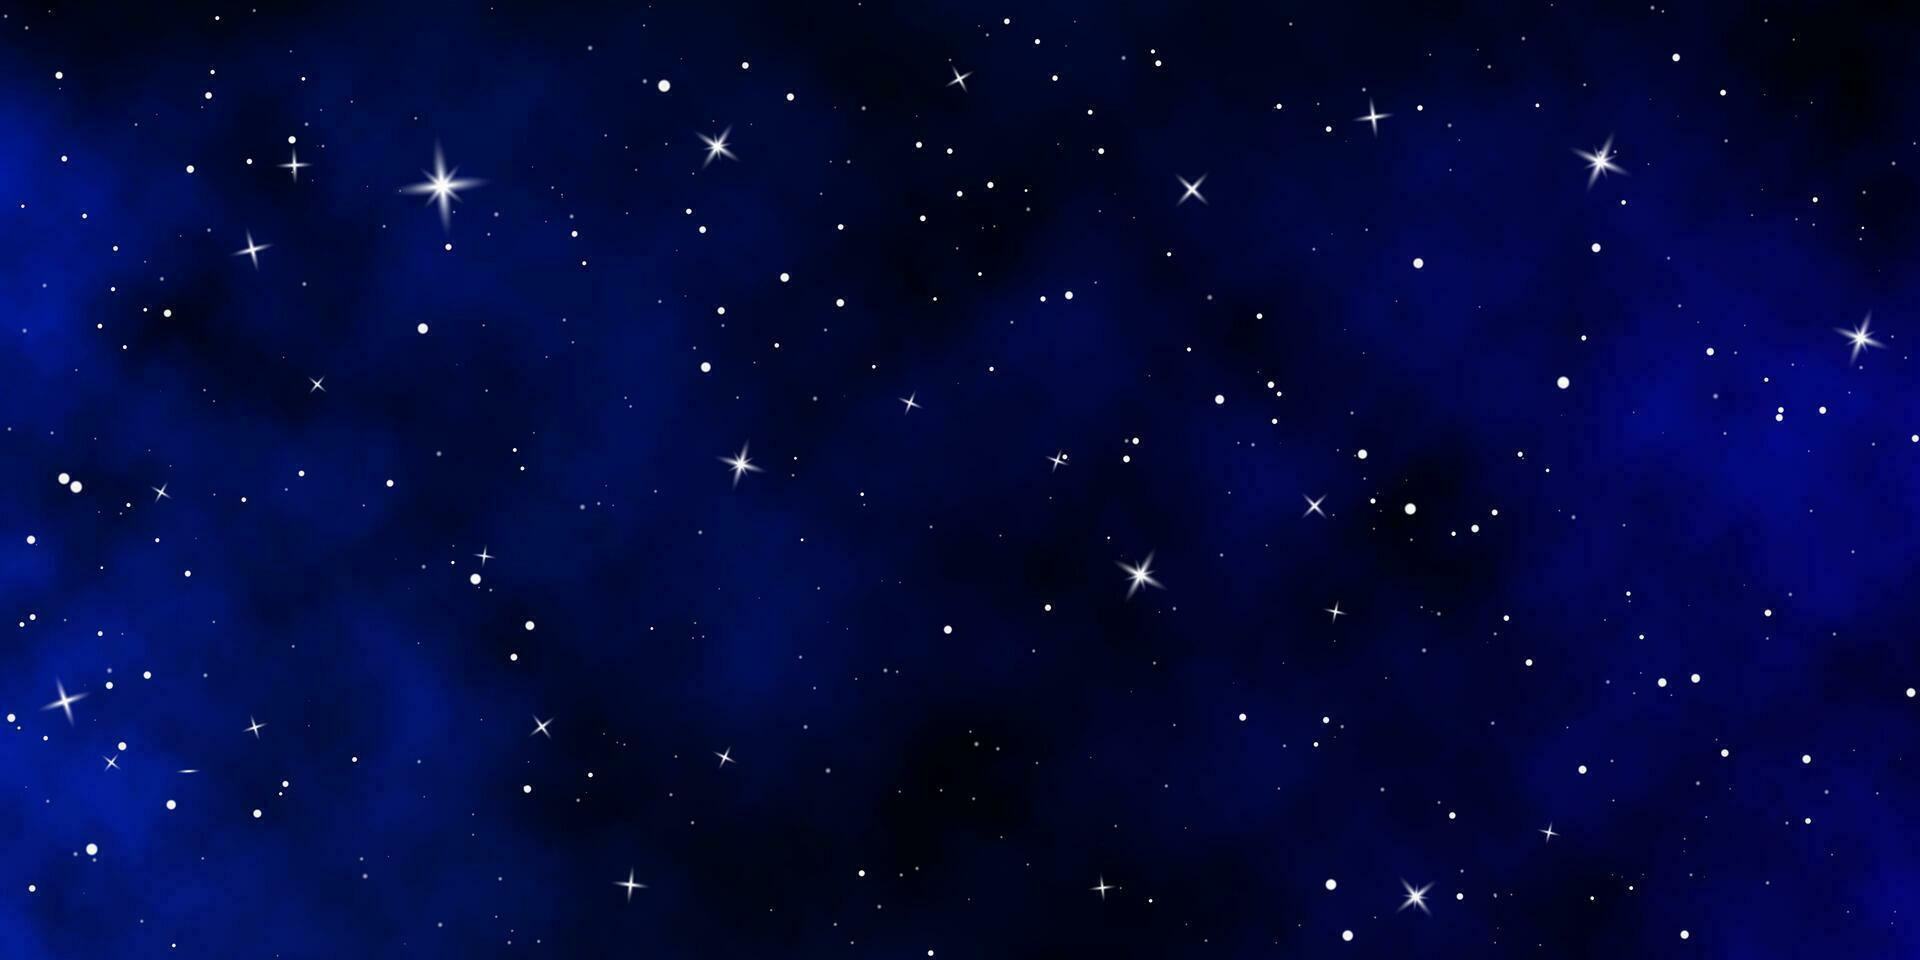 Dark night sky. Starry sky color background. Infinity space with shiny stars. Vector illustration